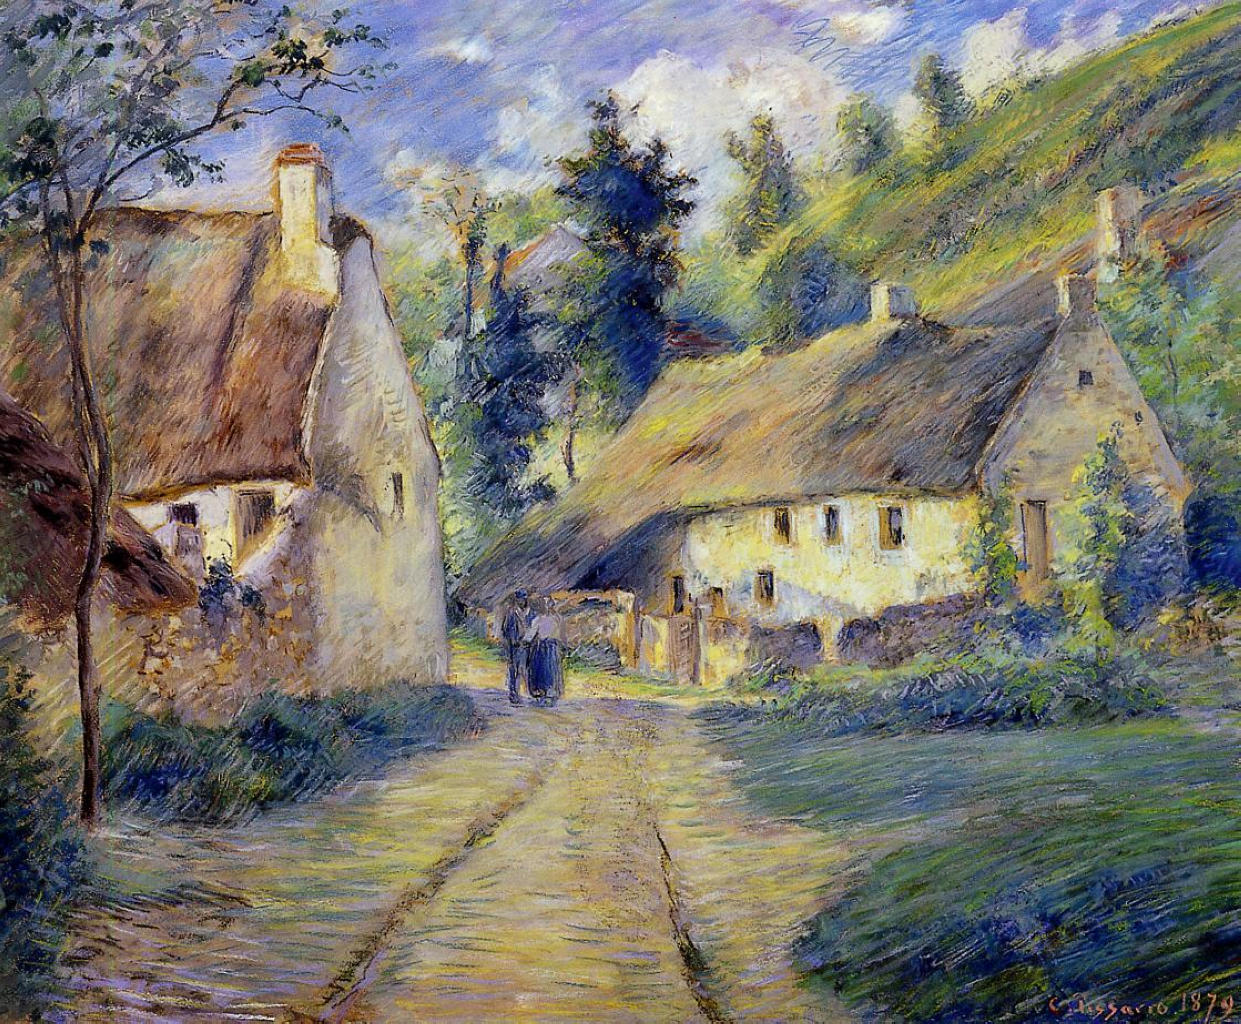 Cottages at Auvers, near Pontoise by Camille Pissarro, 1879